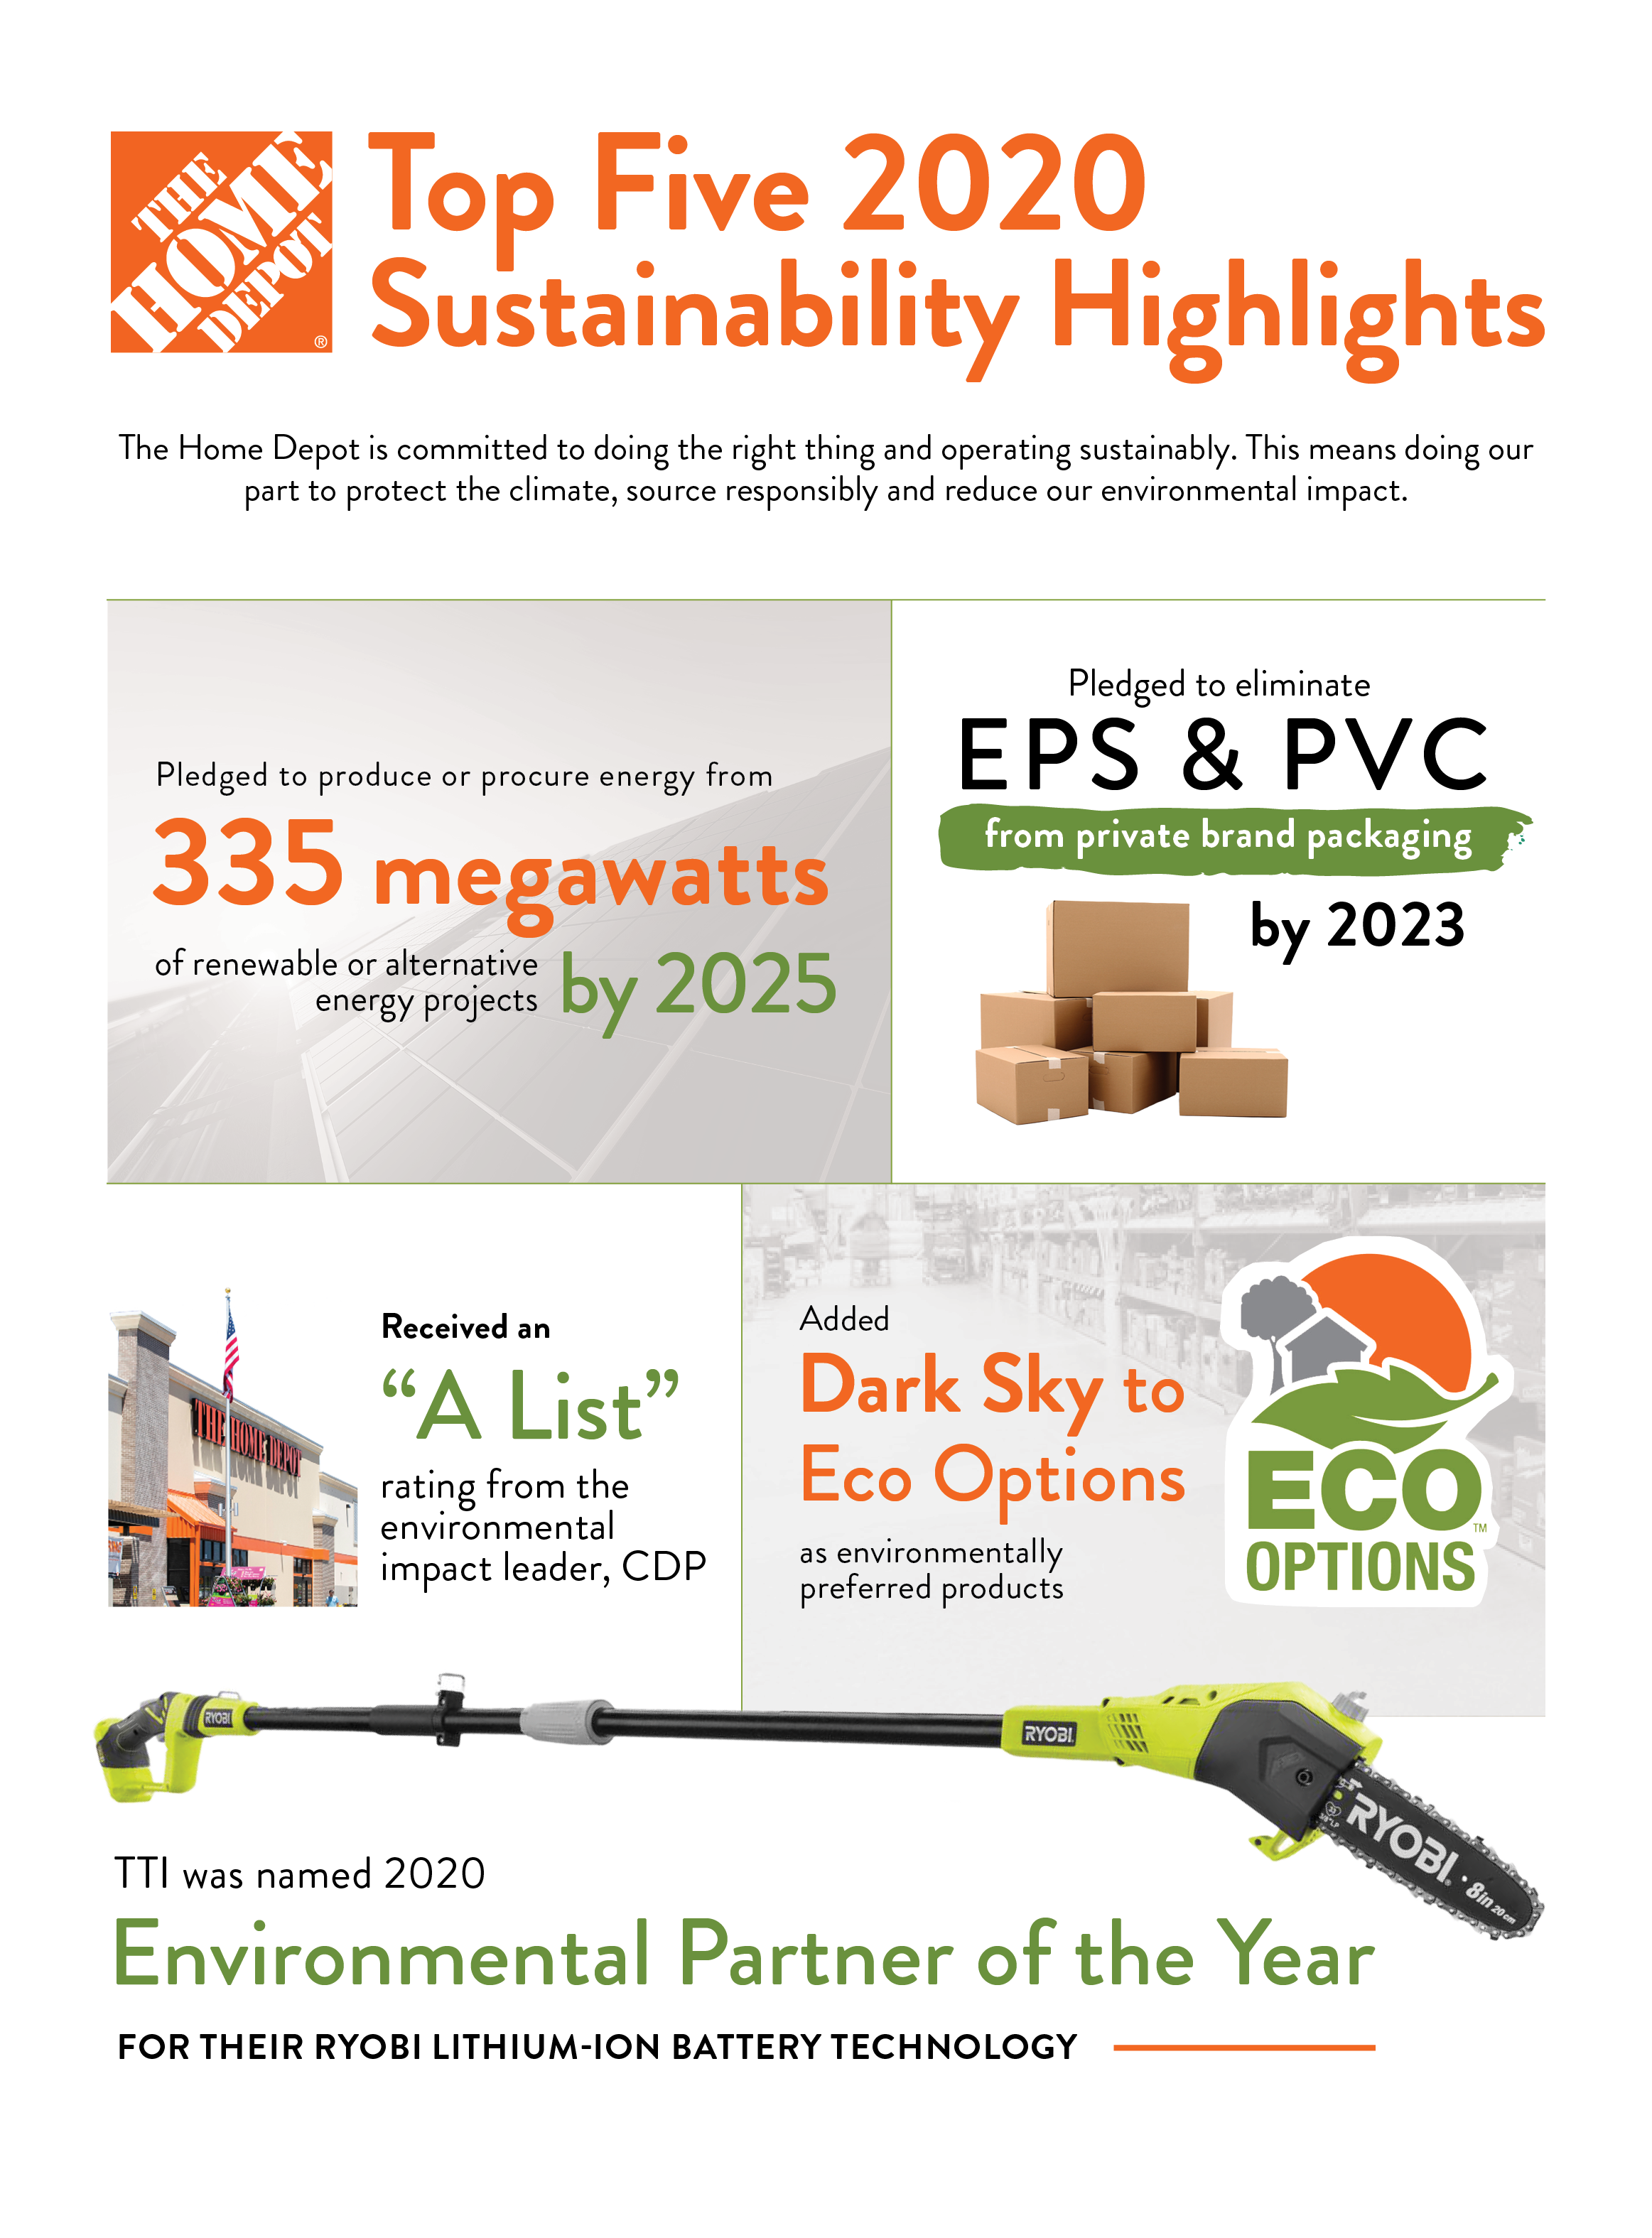 The Top 5 2020 Sustainability Highlights Moving Towards Future Goals